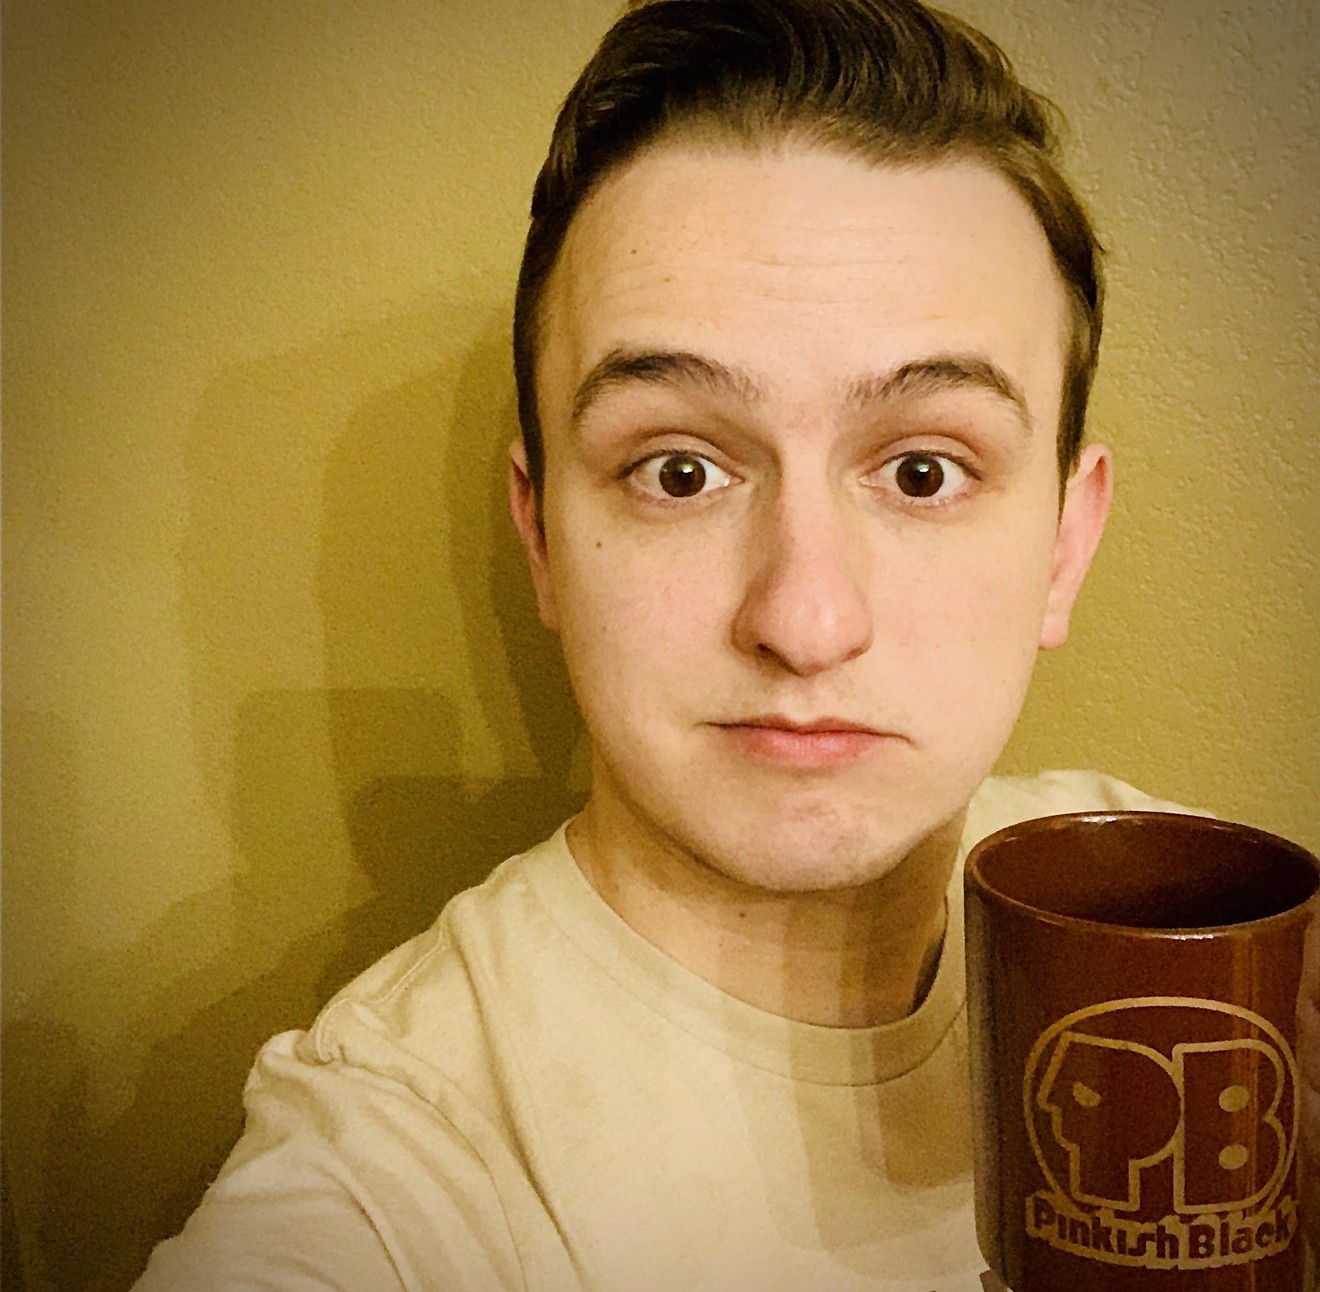 Yes, Garrett's Pinkish Black mug is very cool. But have you read his Tool review?